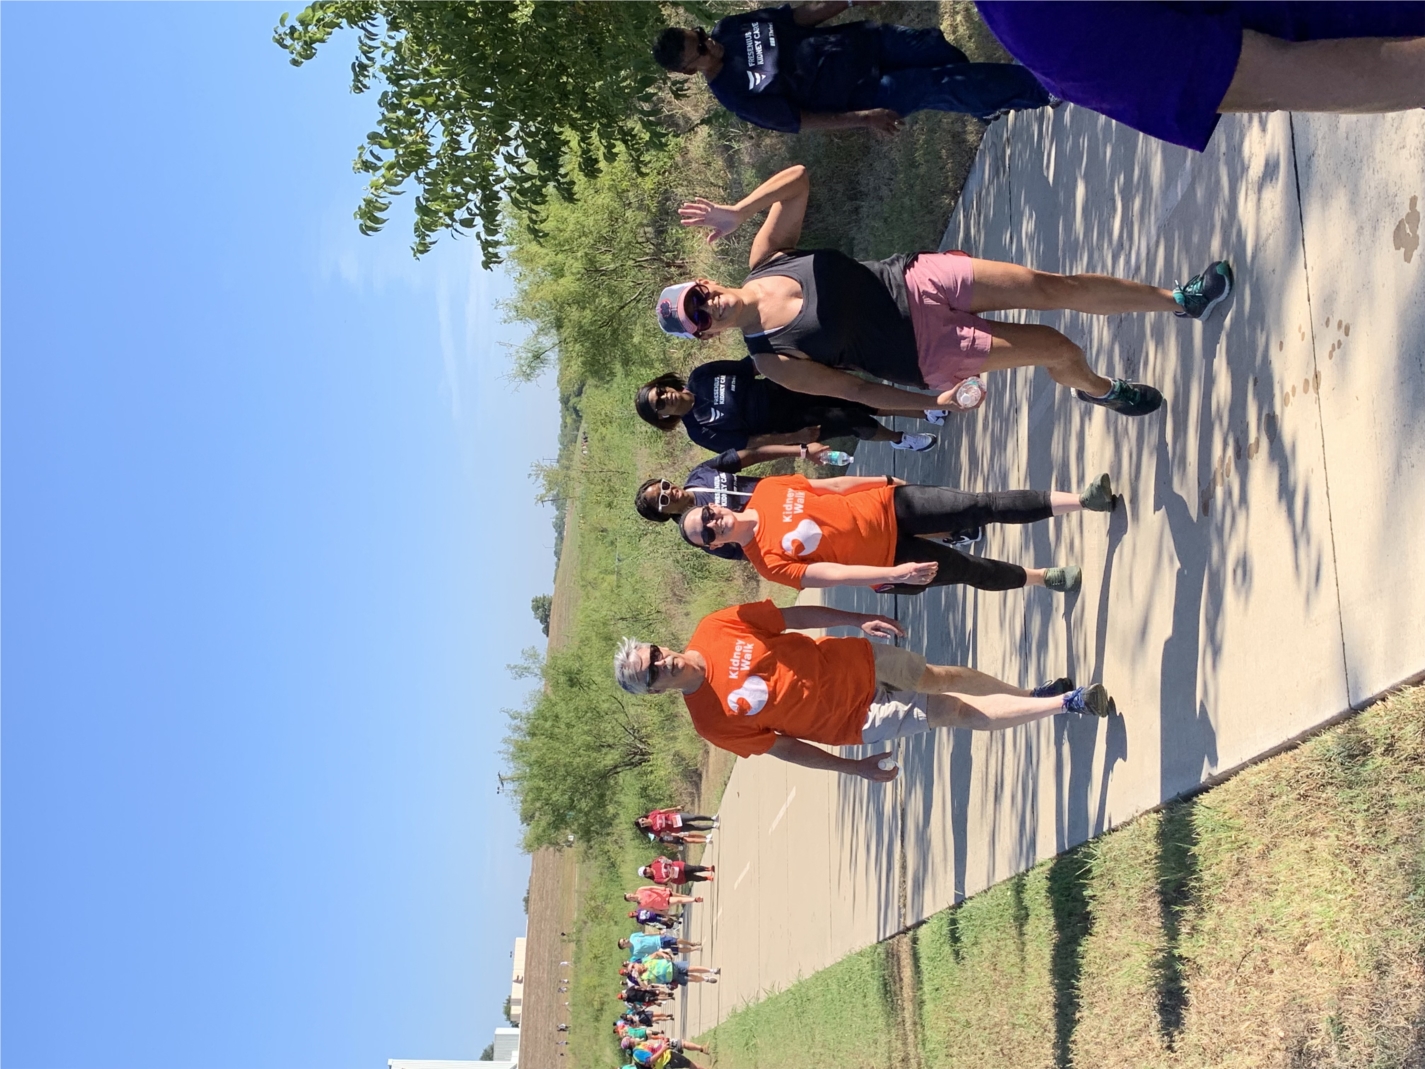 Several Dallas employees took part in the annual National Kidney Foundation walk. Here is a photo of just a few of our walkers.